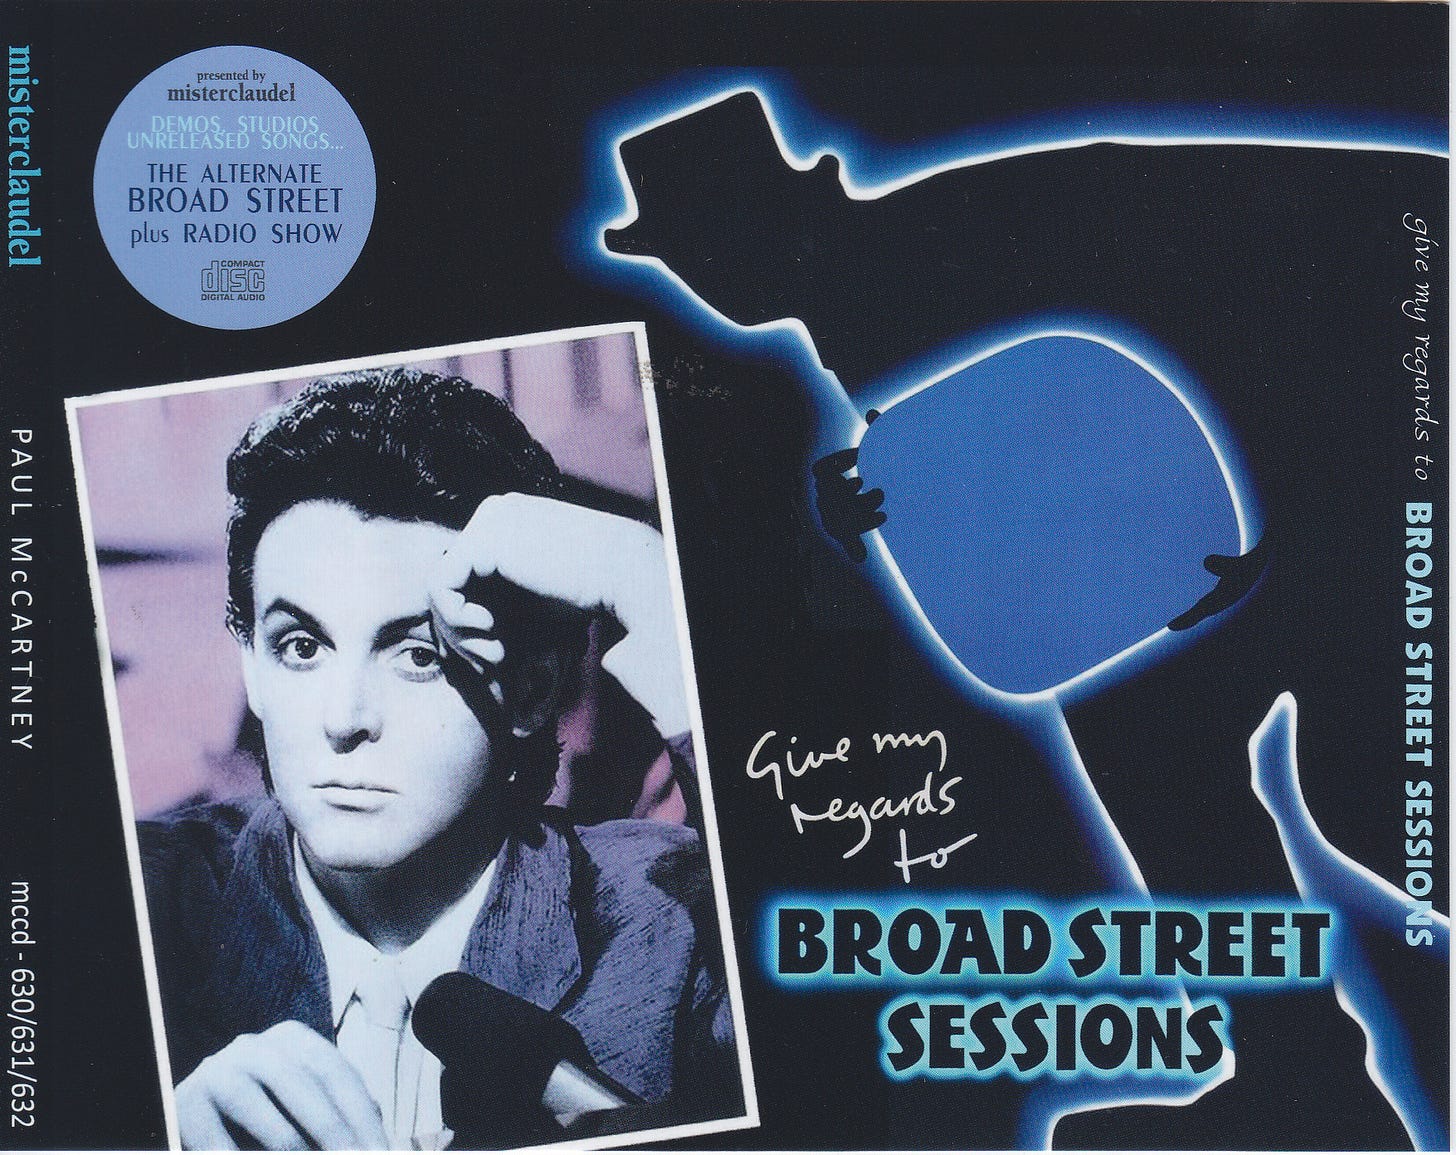 Paul McCartney - Give My Regards To Broad Street Sessions : Paul McCartney  : Free Download, Borrow, and Streaming : Internet Archive